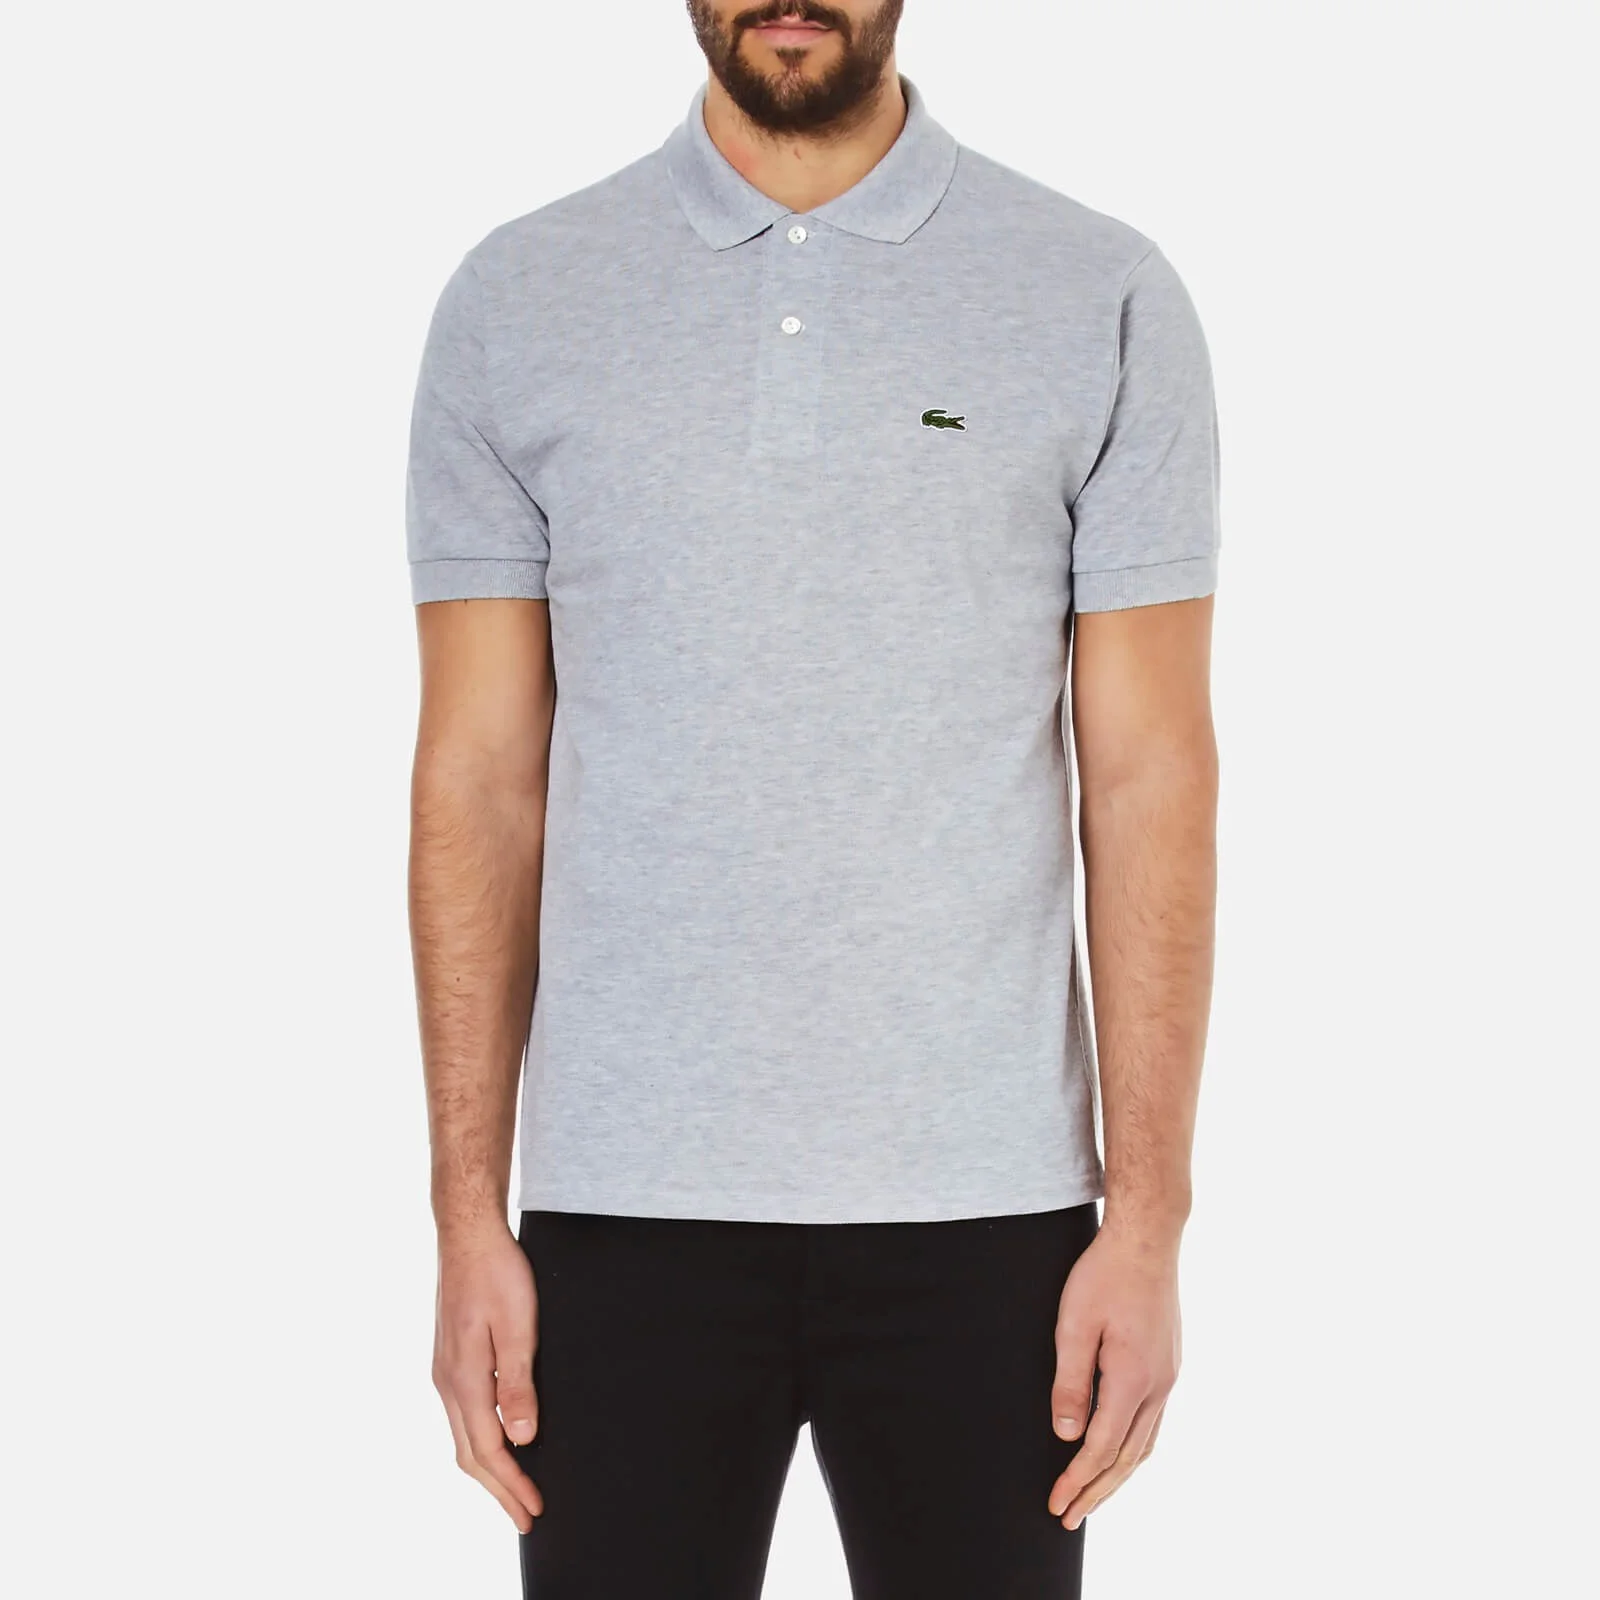 Lacoste Men's Classic Fit Marl Pique Polo Shirt - Silver Chine Image 1